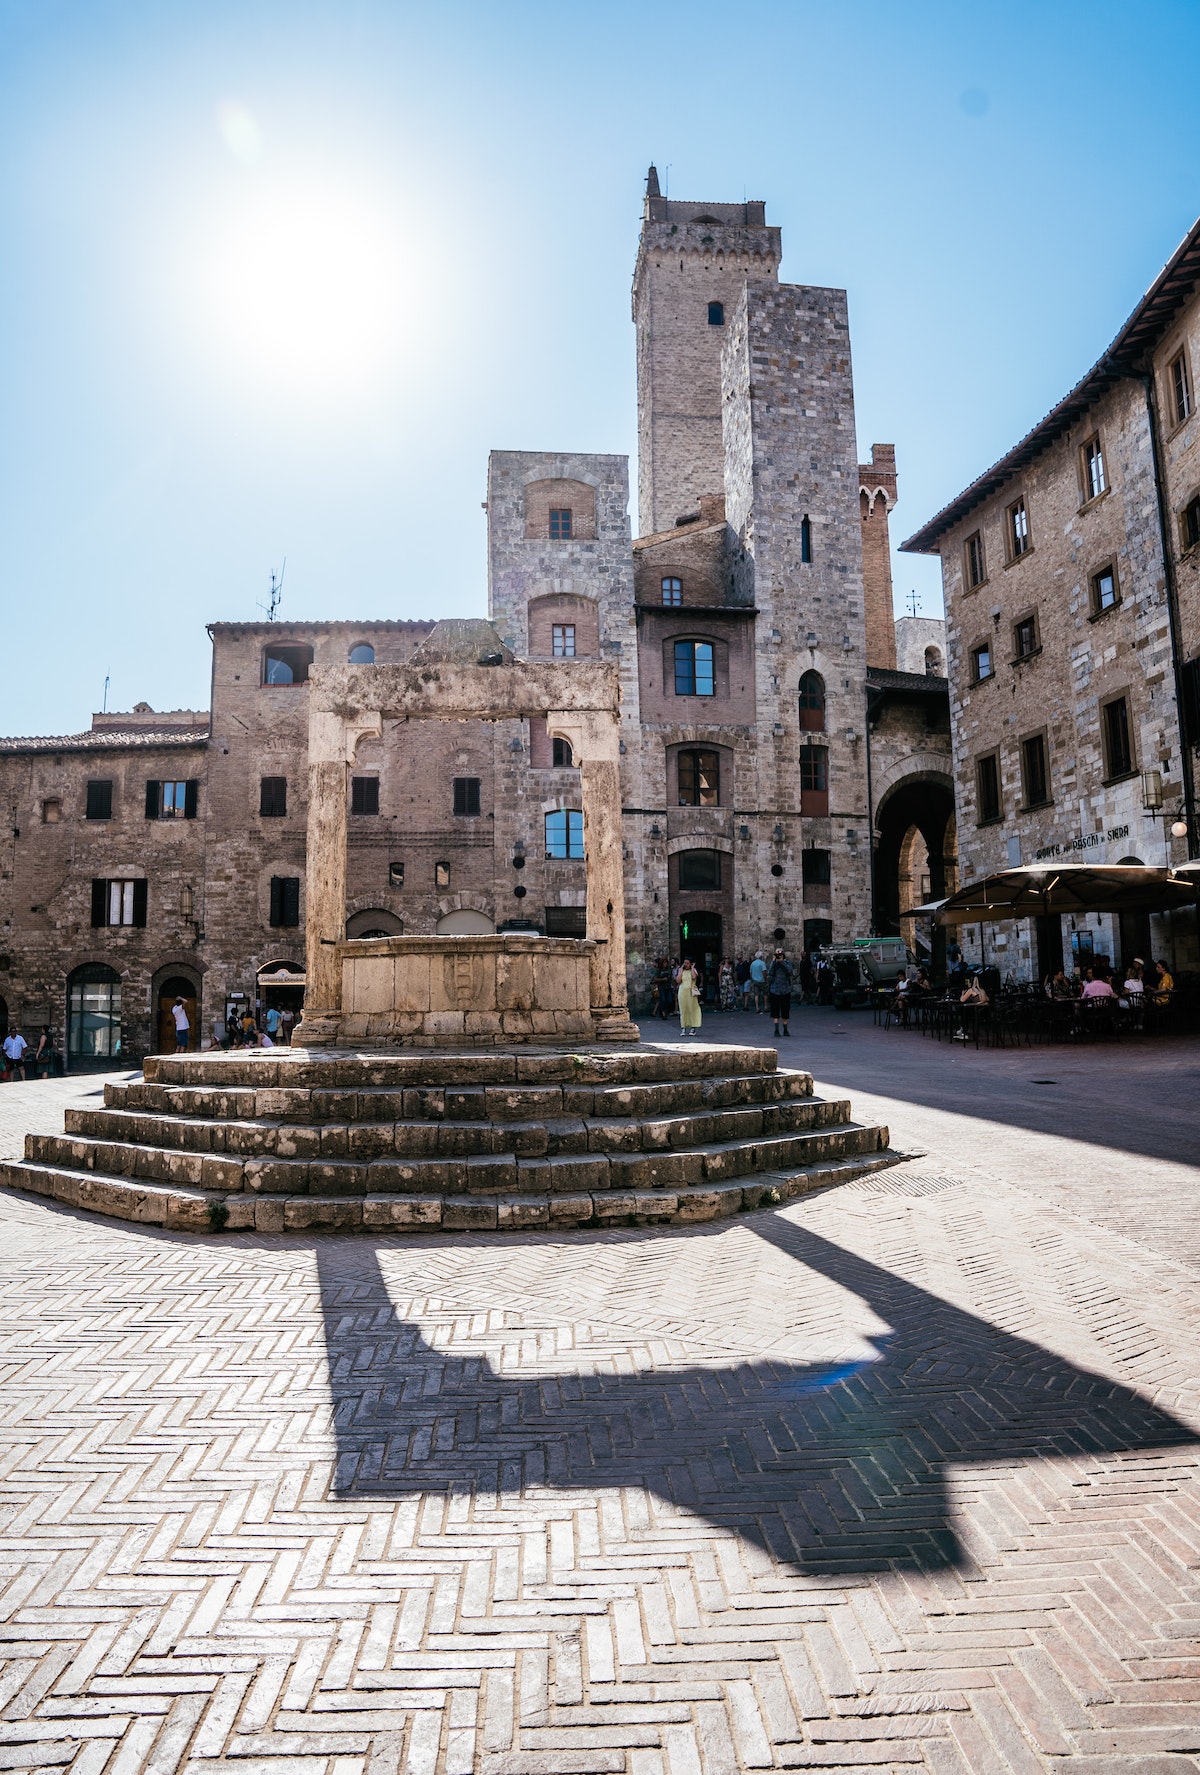 Medieval town square of San Gimignano with a large stone well in the center.